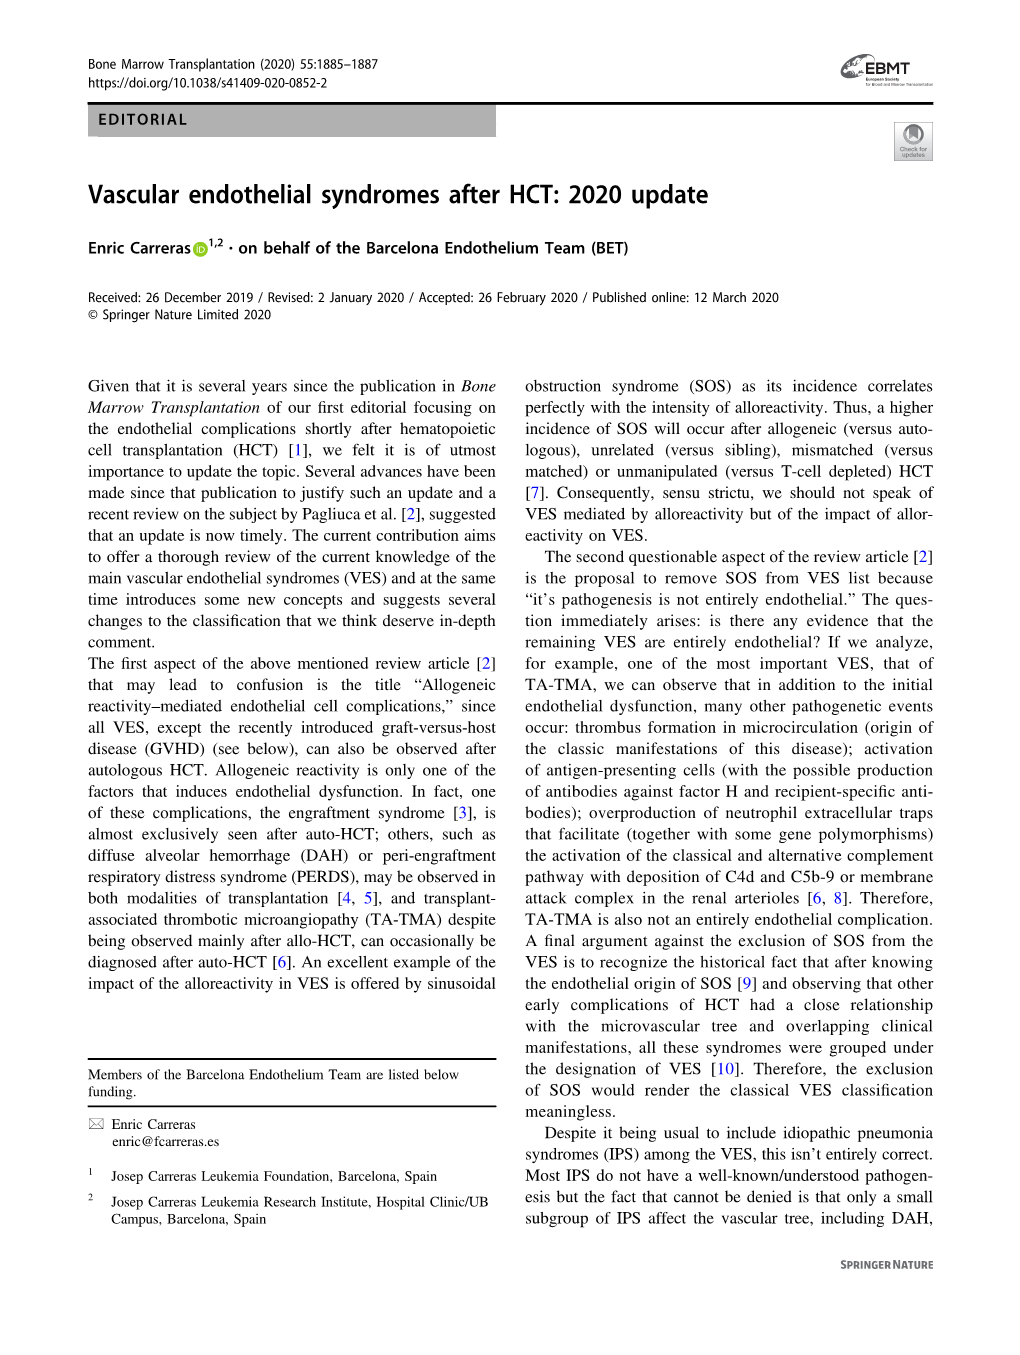 Vascular Endothelial Syndromes After HCT: 2020 Update